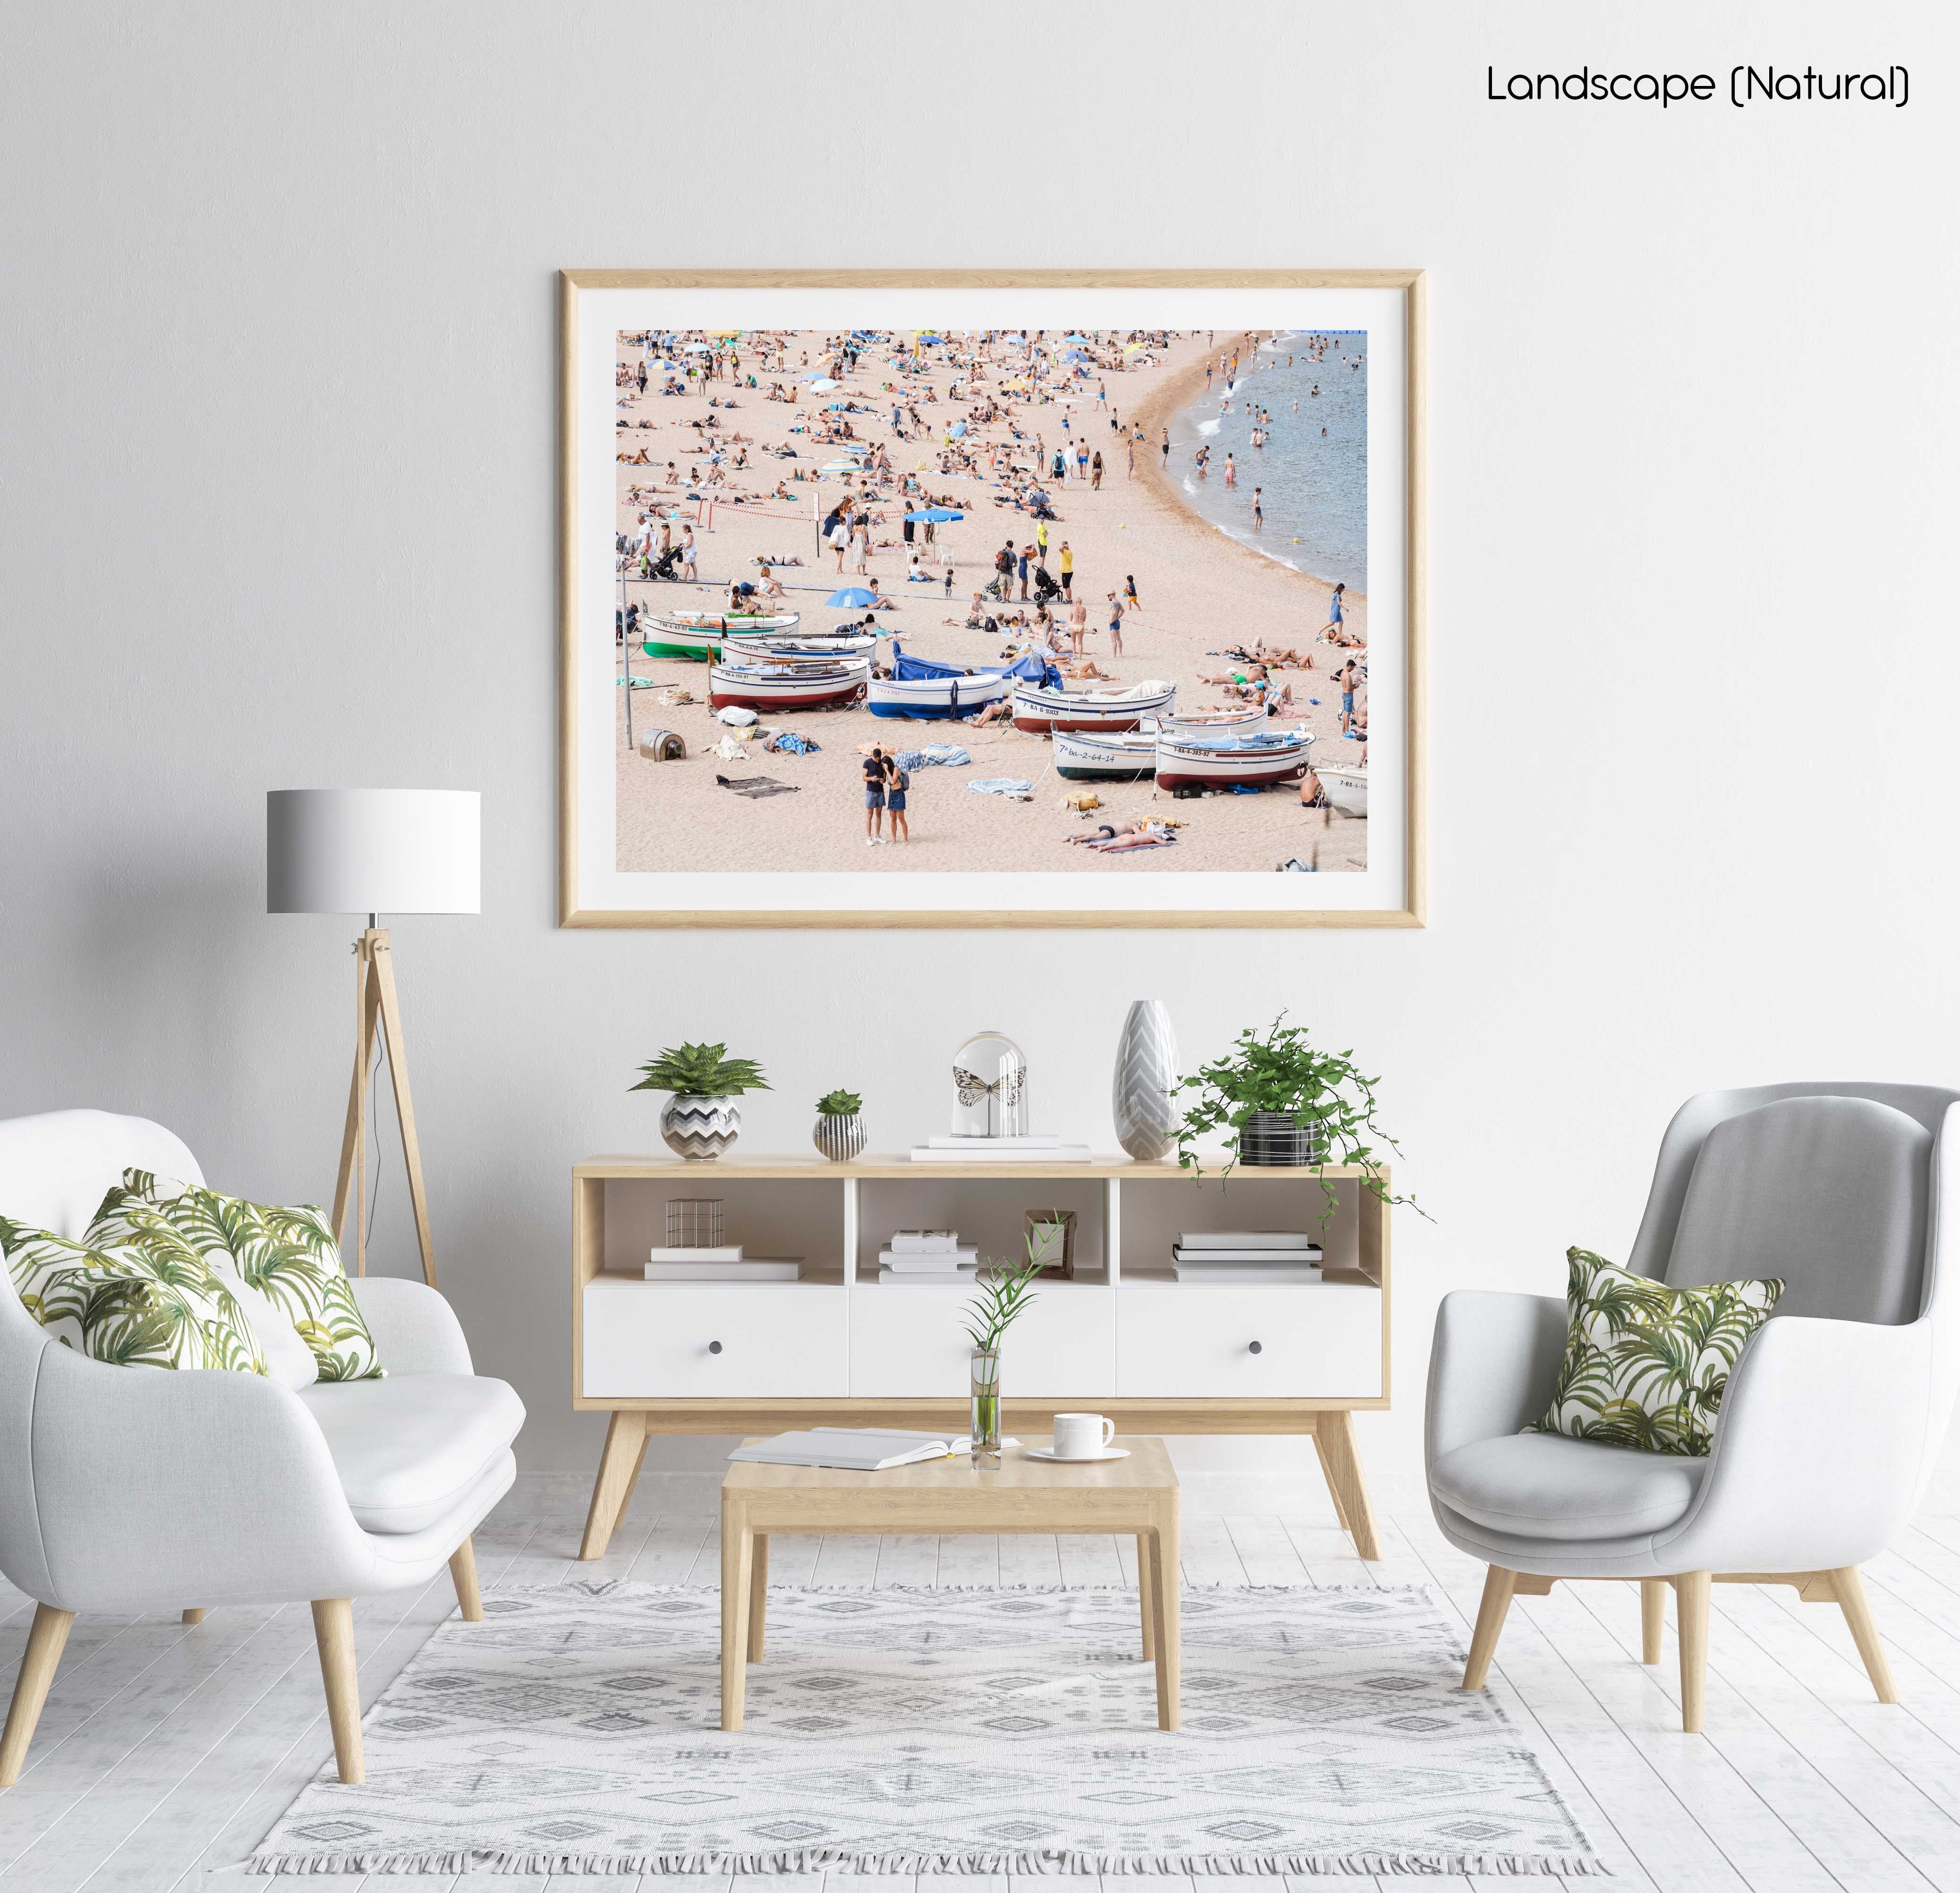 Boats and people beached along Tossa de Mar beach in a natural fine art frame